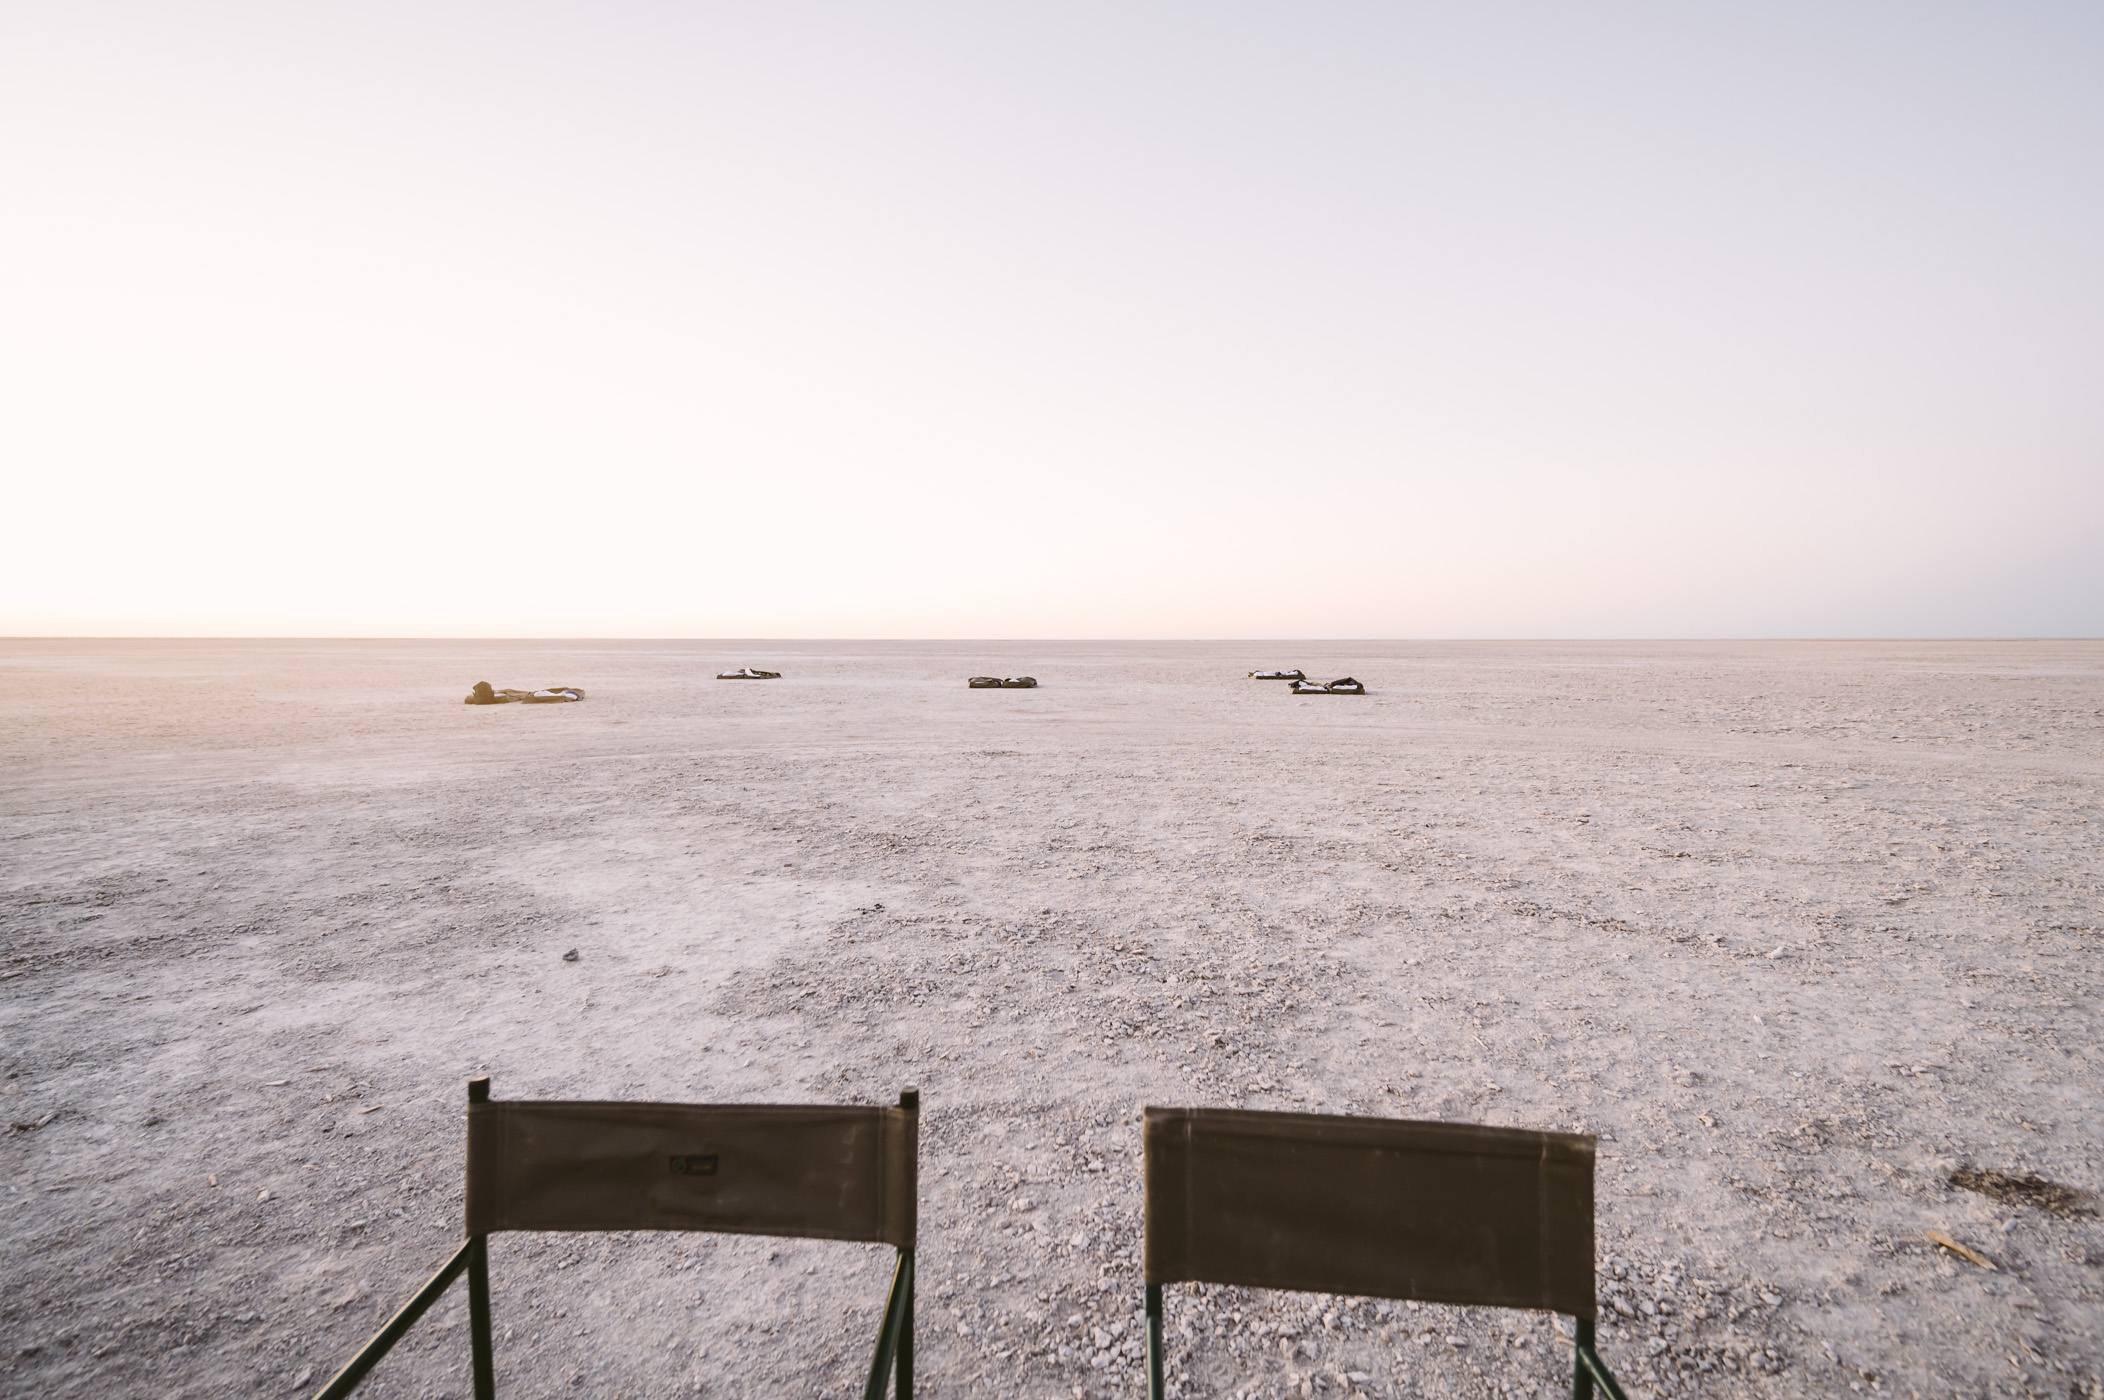 Sleep-out under the stars in the Salt Pan in Botswana